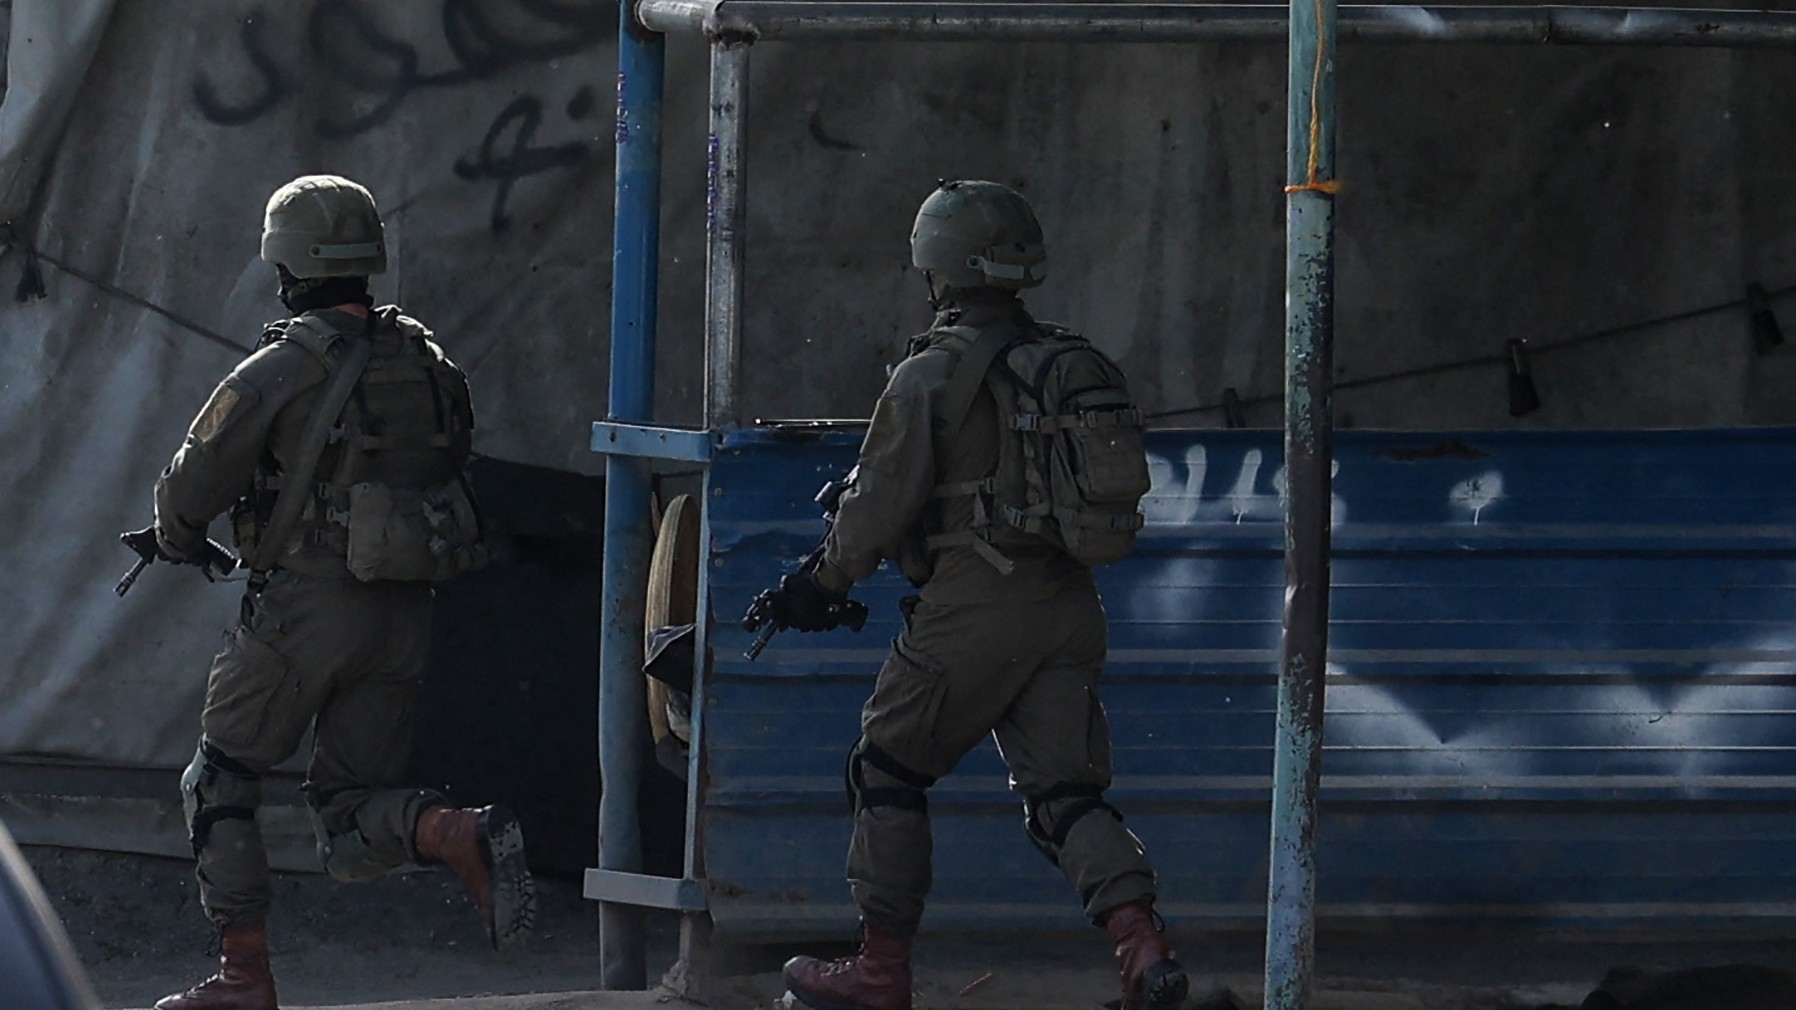 Israeli troops during a raid looking for suspects related to a gunman from Jenin on 10 April 2022.